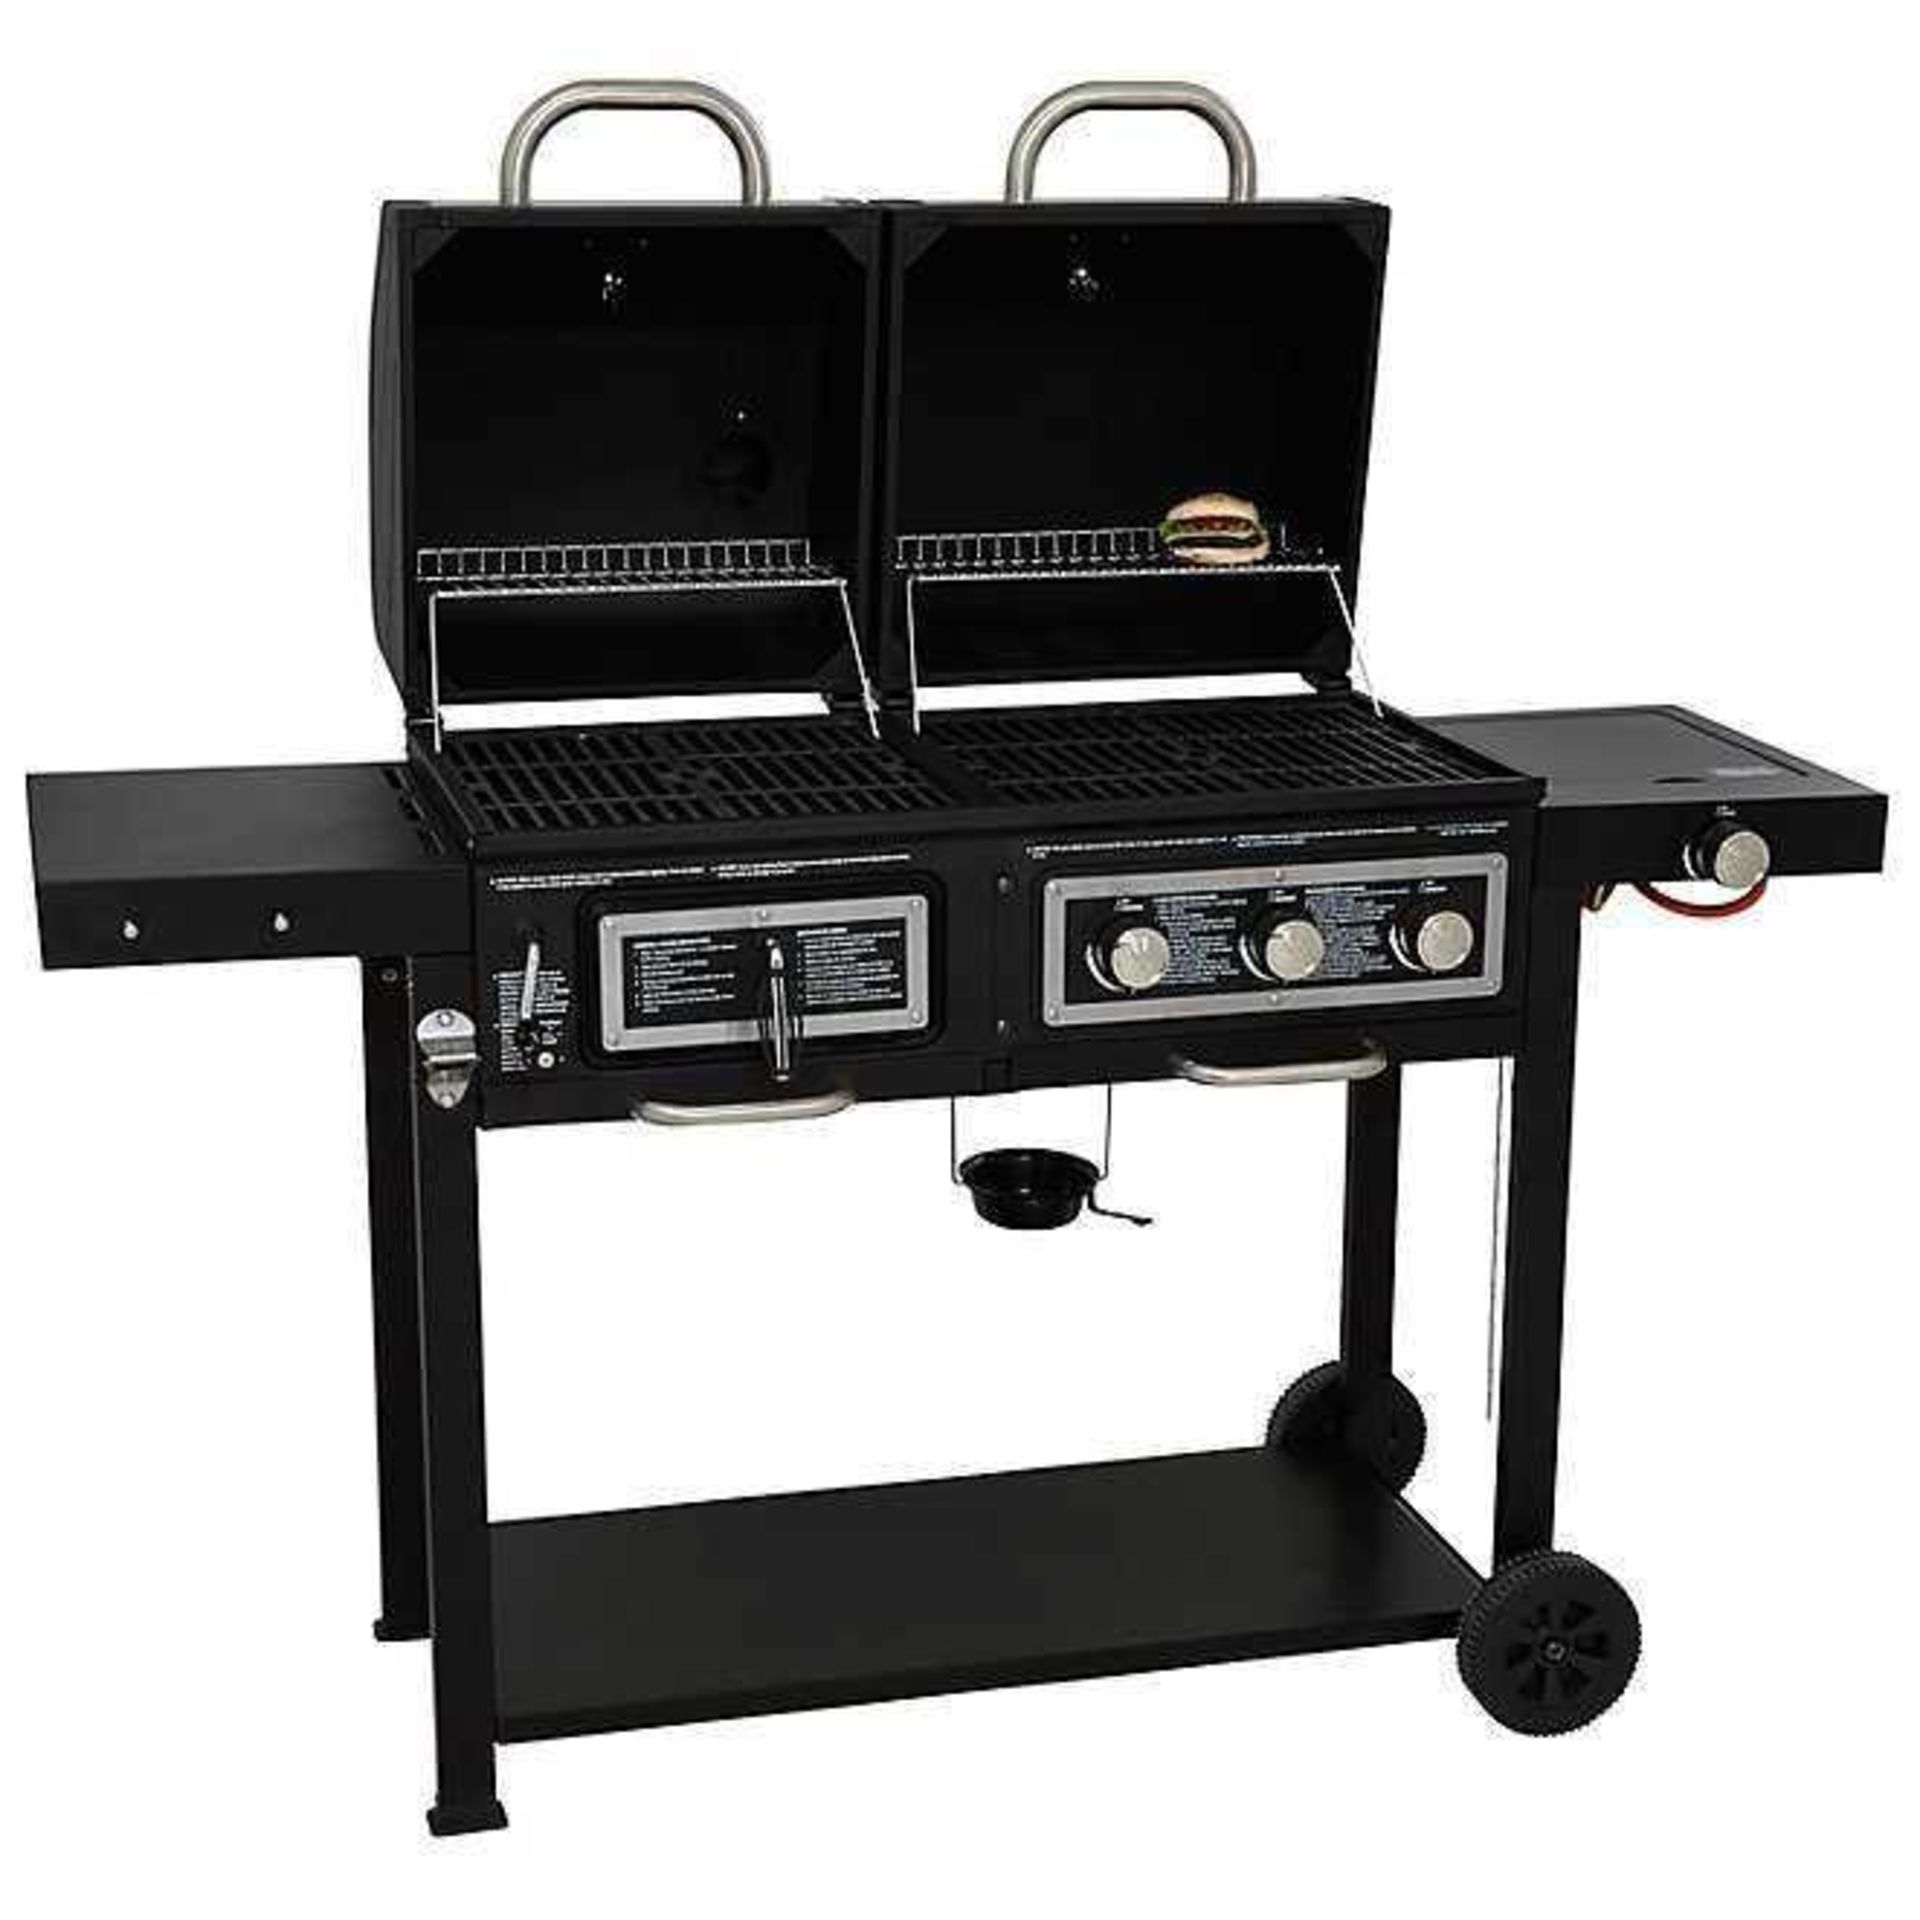 Rrp £110 Boxed Uniflame Classic Gas And Charcoal Combination Grill